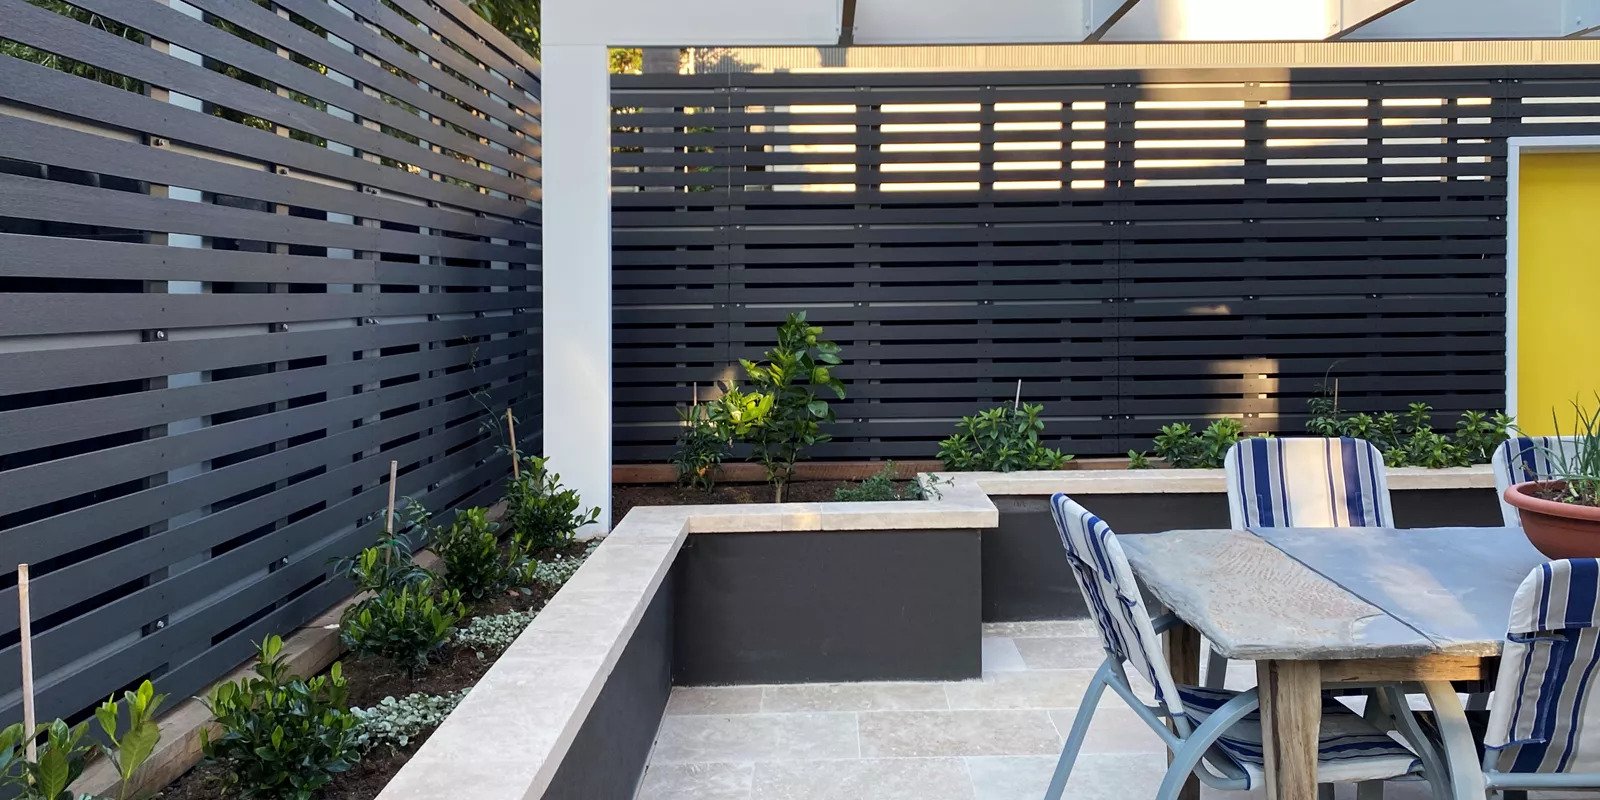 Six Practical Ways to Use Screening to Turn Your Backyard into a Stylish Oasis